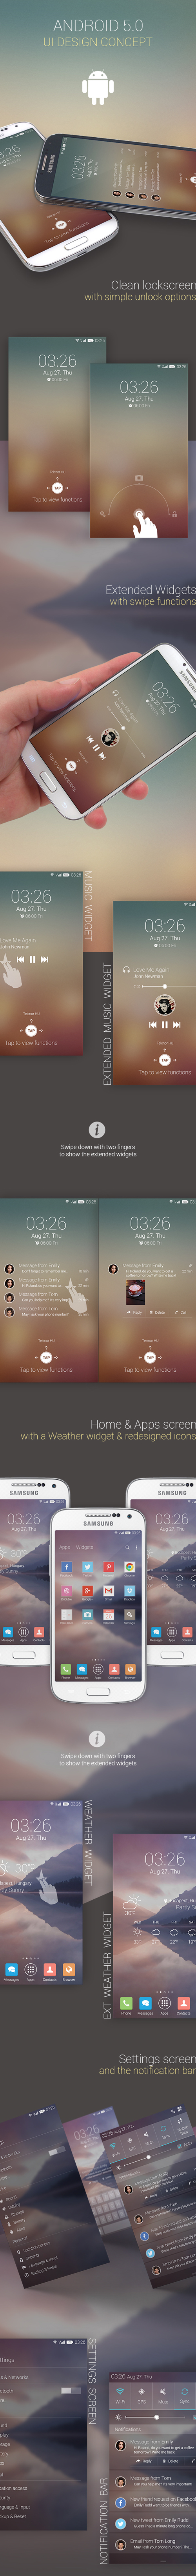 Android 5.0 UI Designs and Concepts for Inspiration